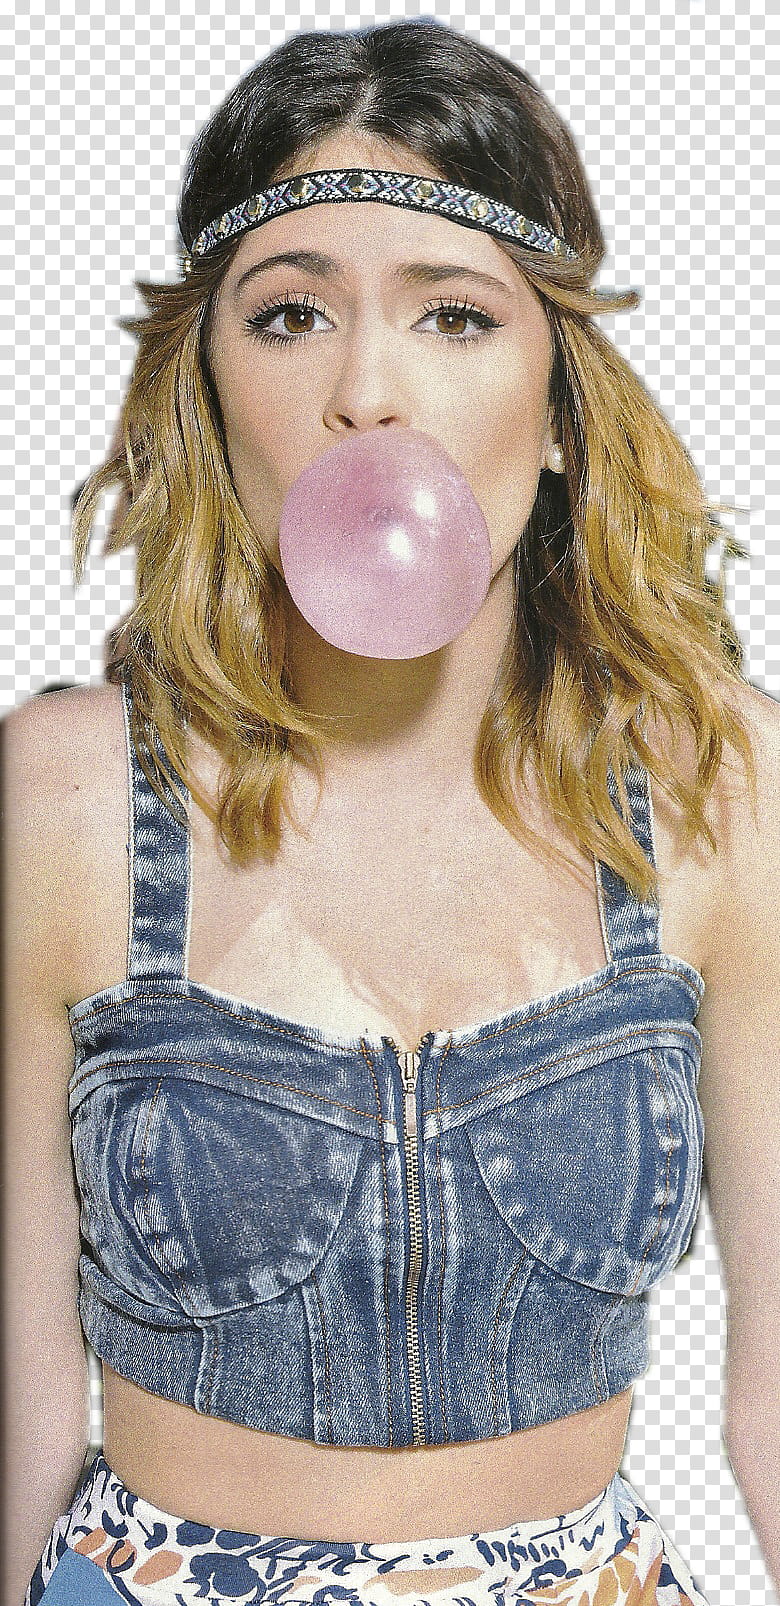 Martina Stoessel, woman in blue denim crop top chewing gum transparent background PNG clipart